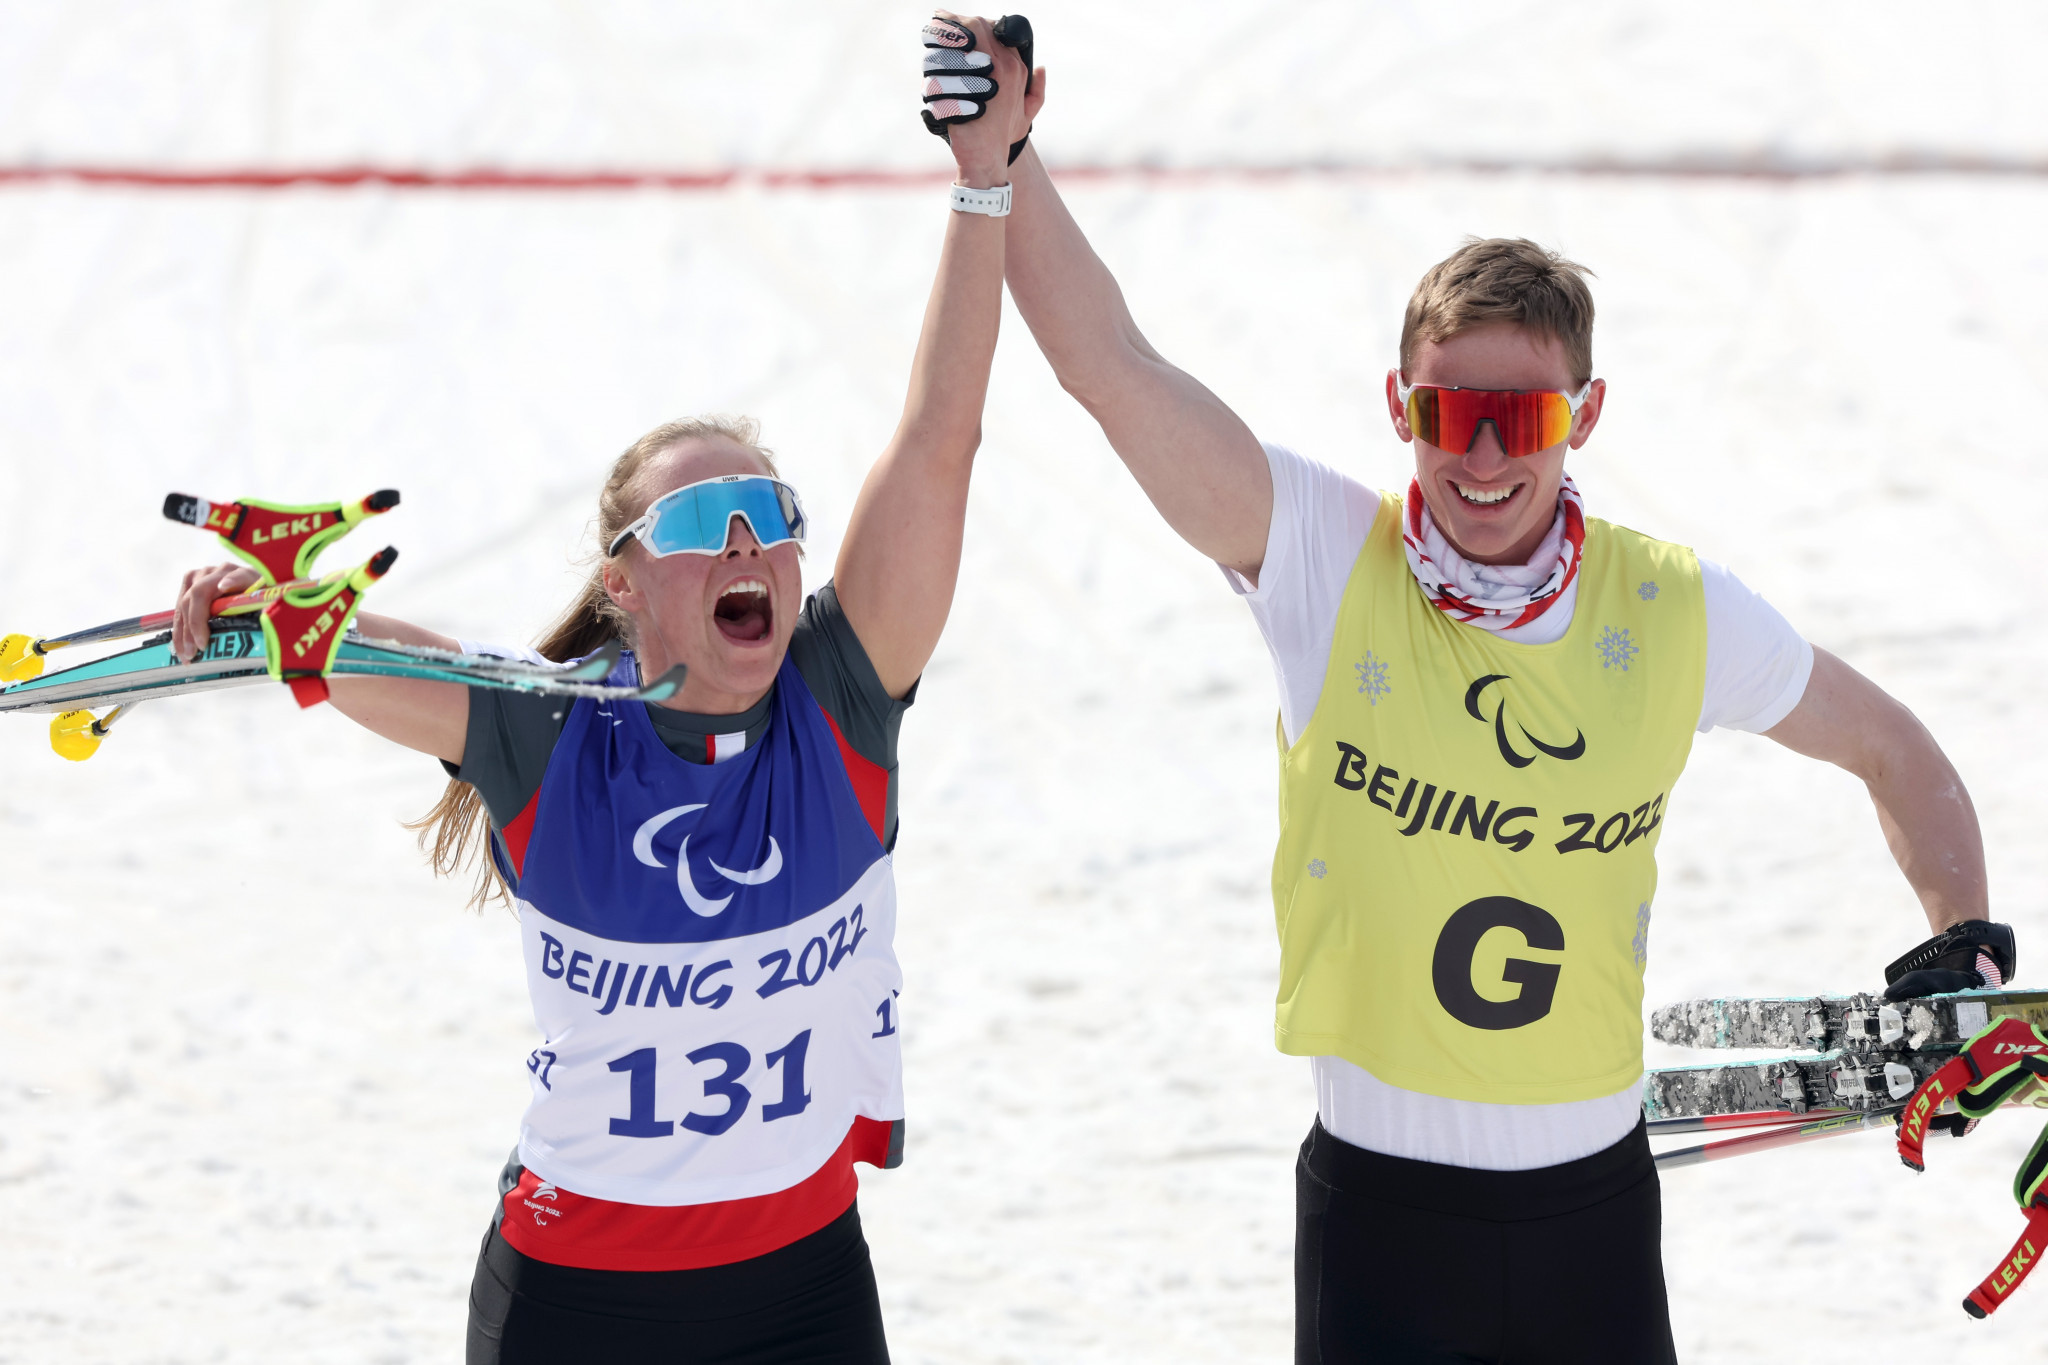 Carina Edlinger celebrates with guide Lorenz Josef Lampl after winning women's sprint free technique vision impaired gold ©Getty Images